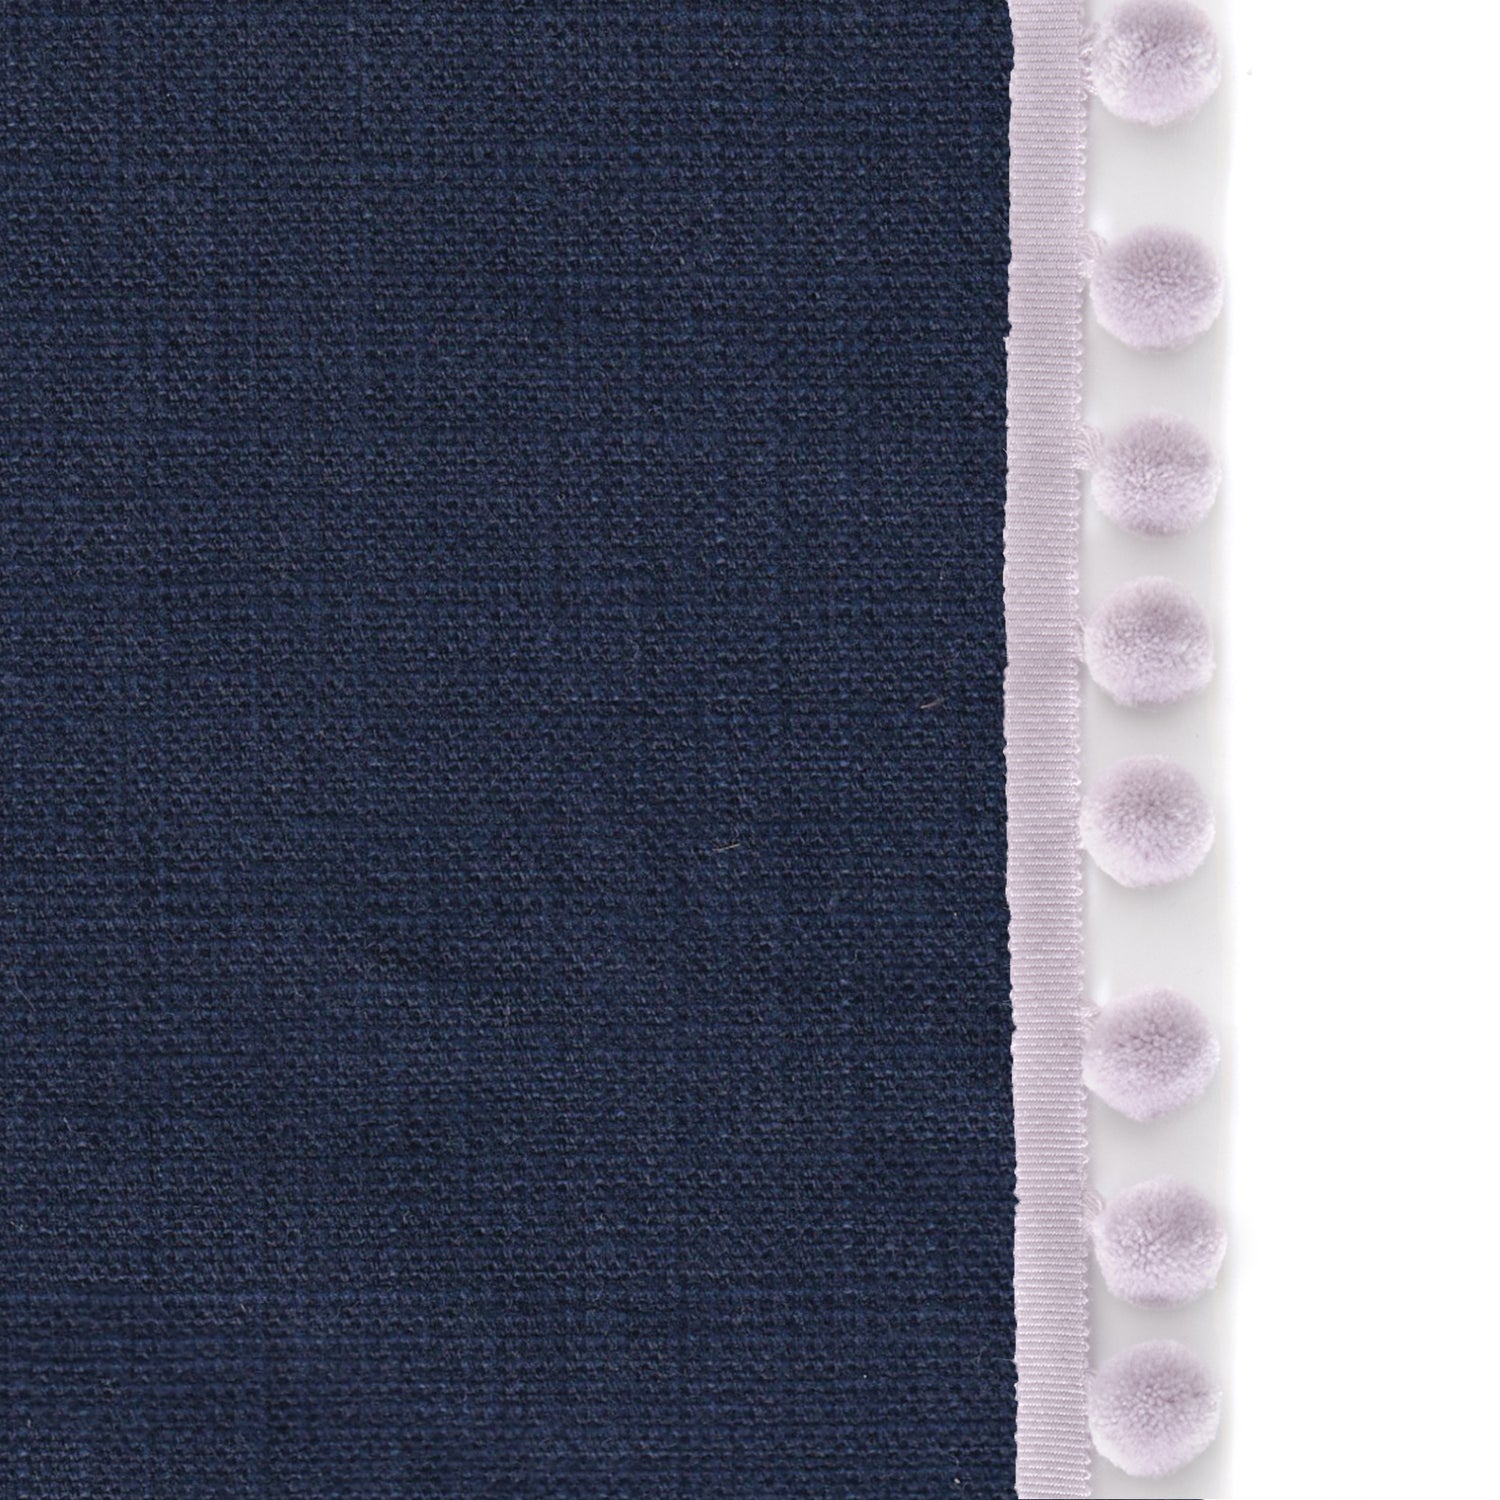 Upclose picture of Midnight custom Navy Bluecurtain with lilac pom pom trim